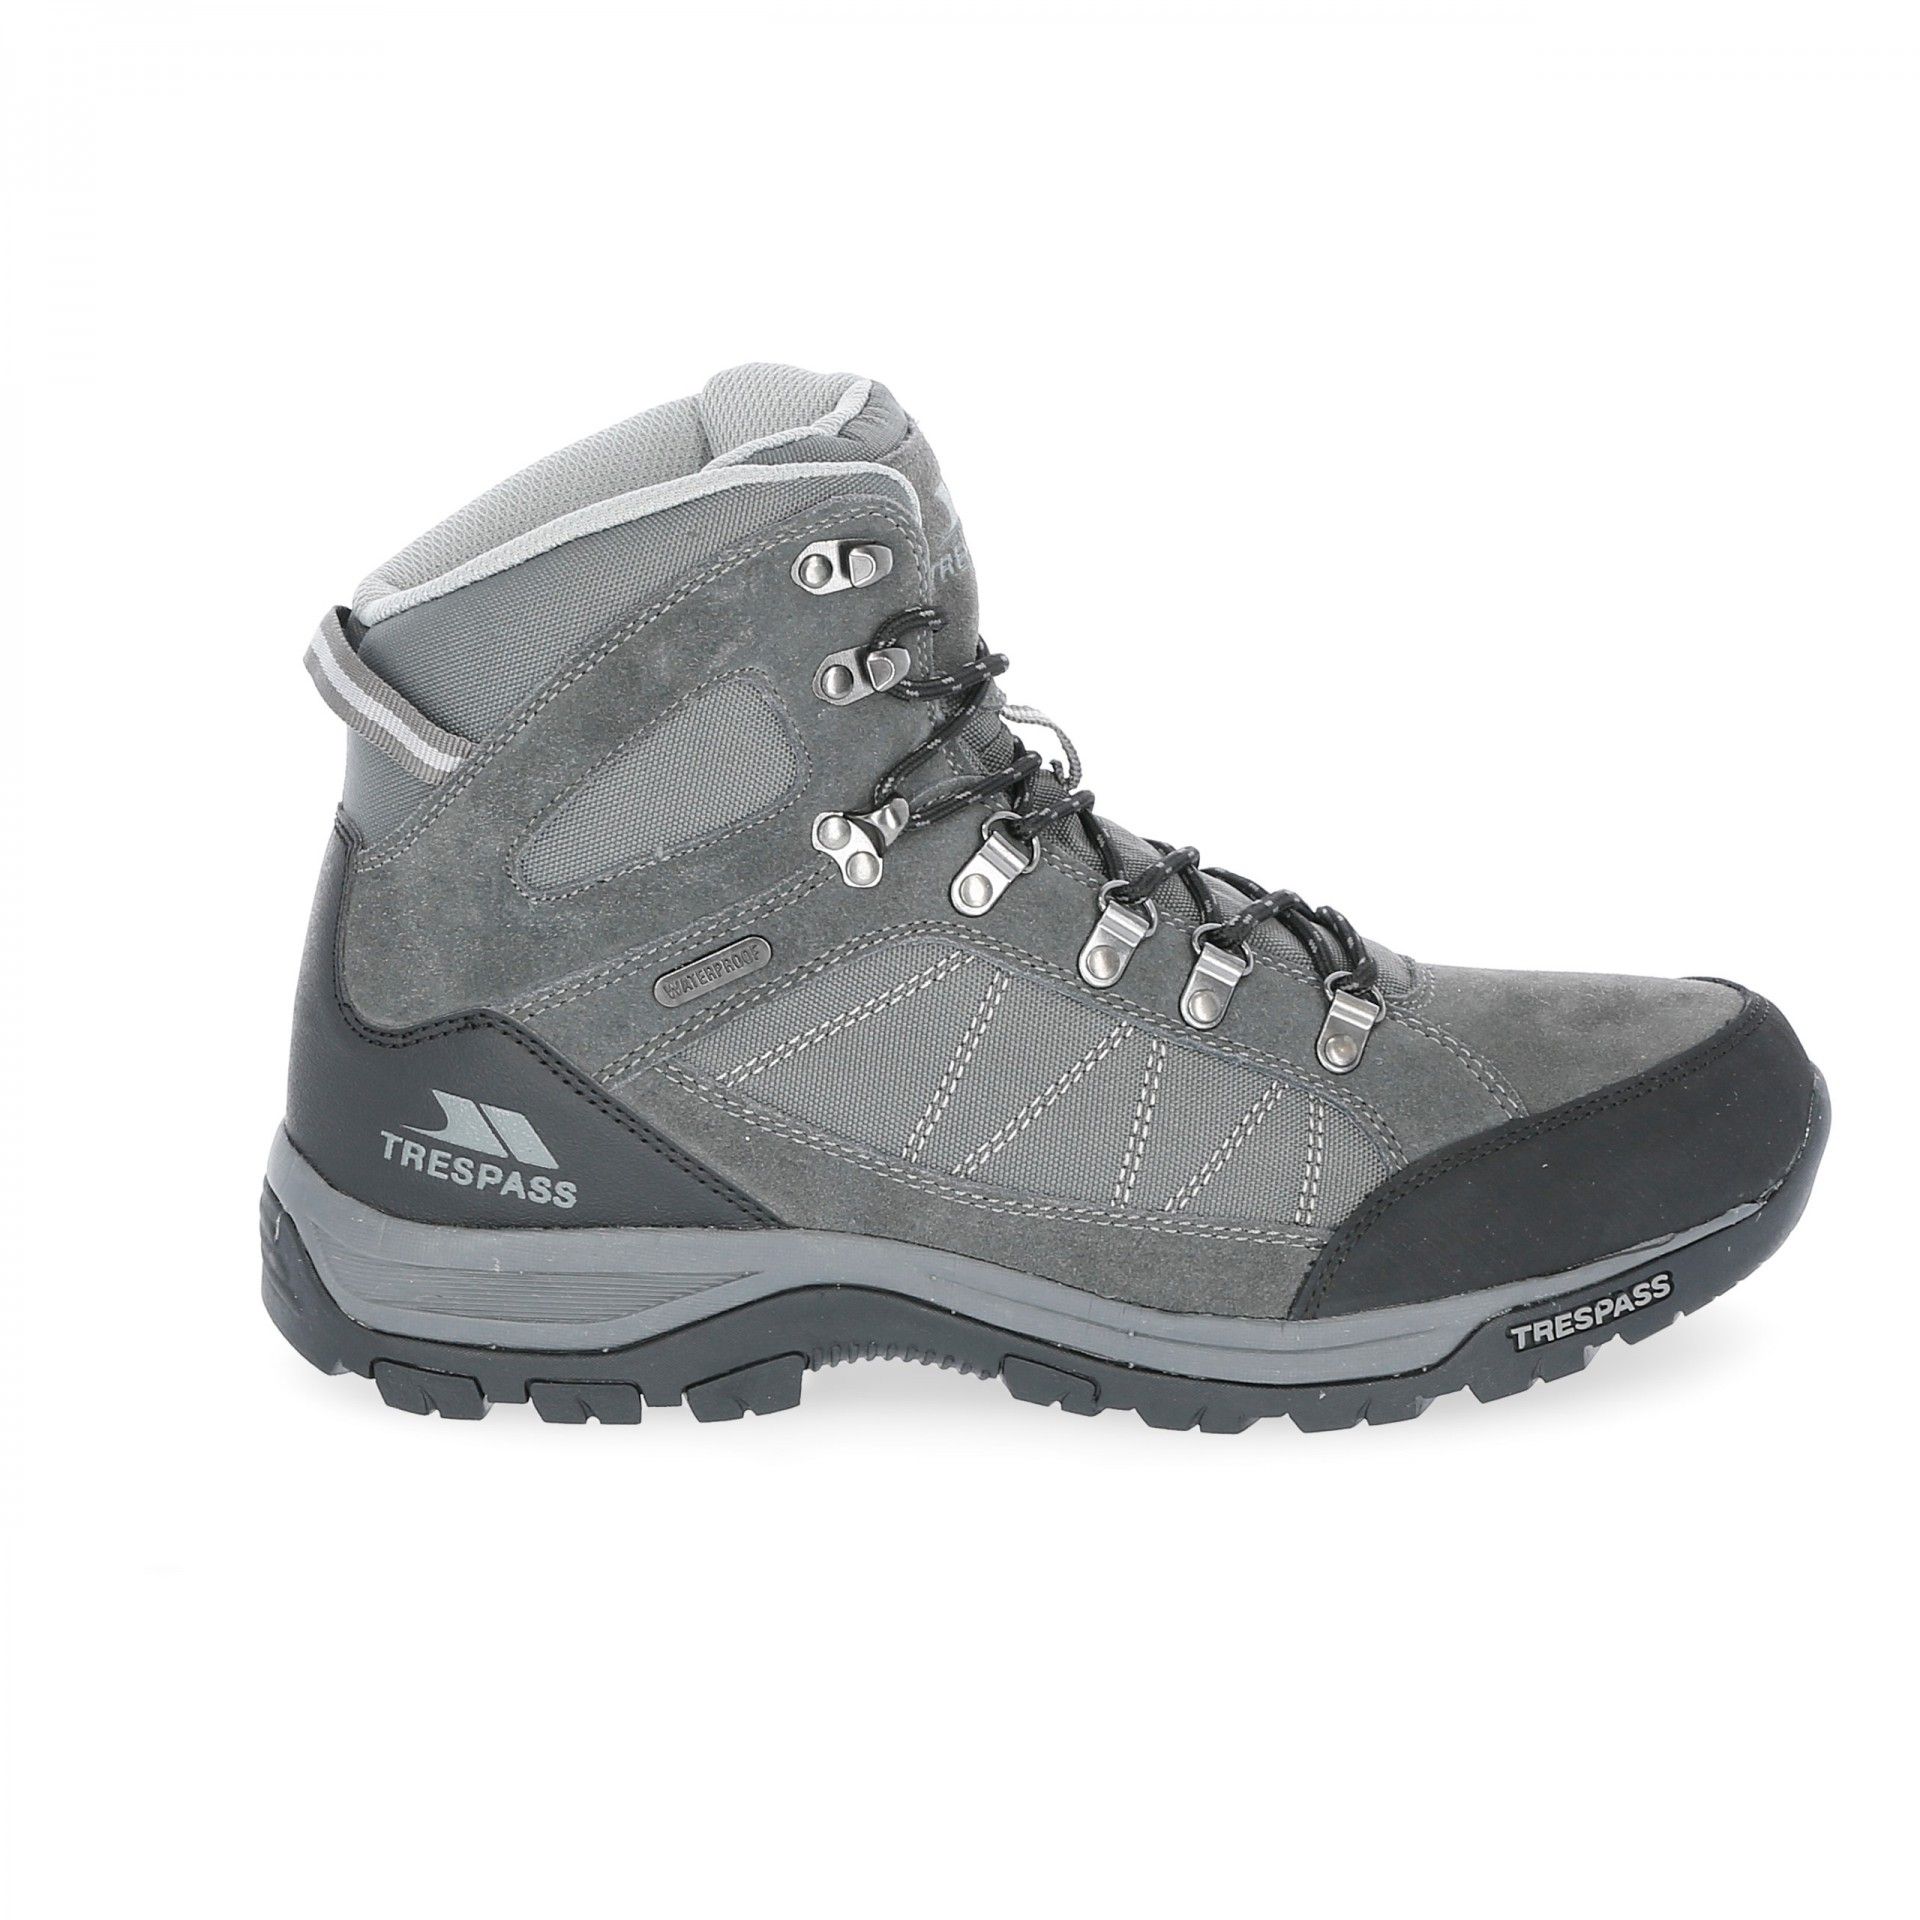 Trail mid cut hiking boots. Waterproof and breathable membrane. Gussetted tongue. Protective and durable rubber toe guard. Ankle supportive cushioned collar and tongue. Arch stabilising and supportive steel shank. Cushioned footbed. Durable traction outsole. Upper: textile/cow suede/PU/rubber. Lining: textile. Outsole: moulded EVA/rubber.